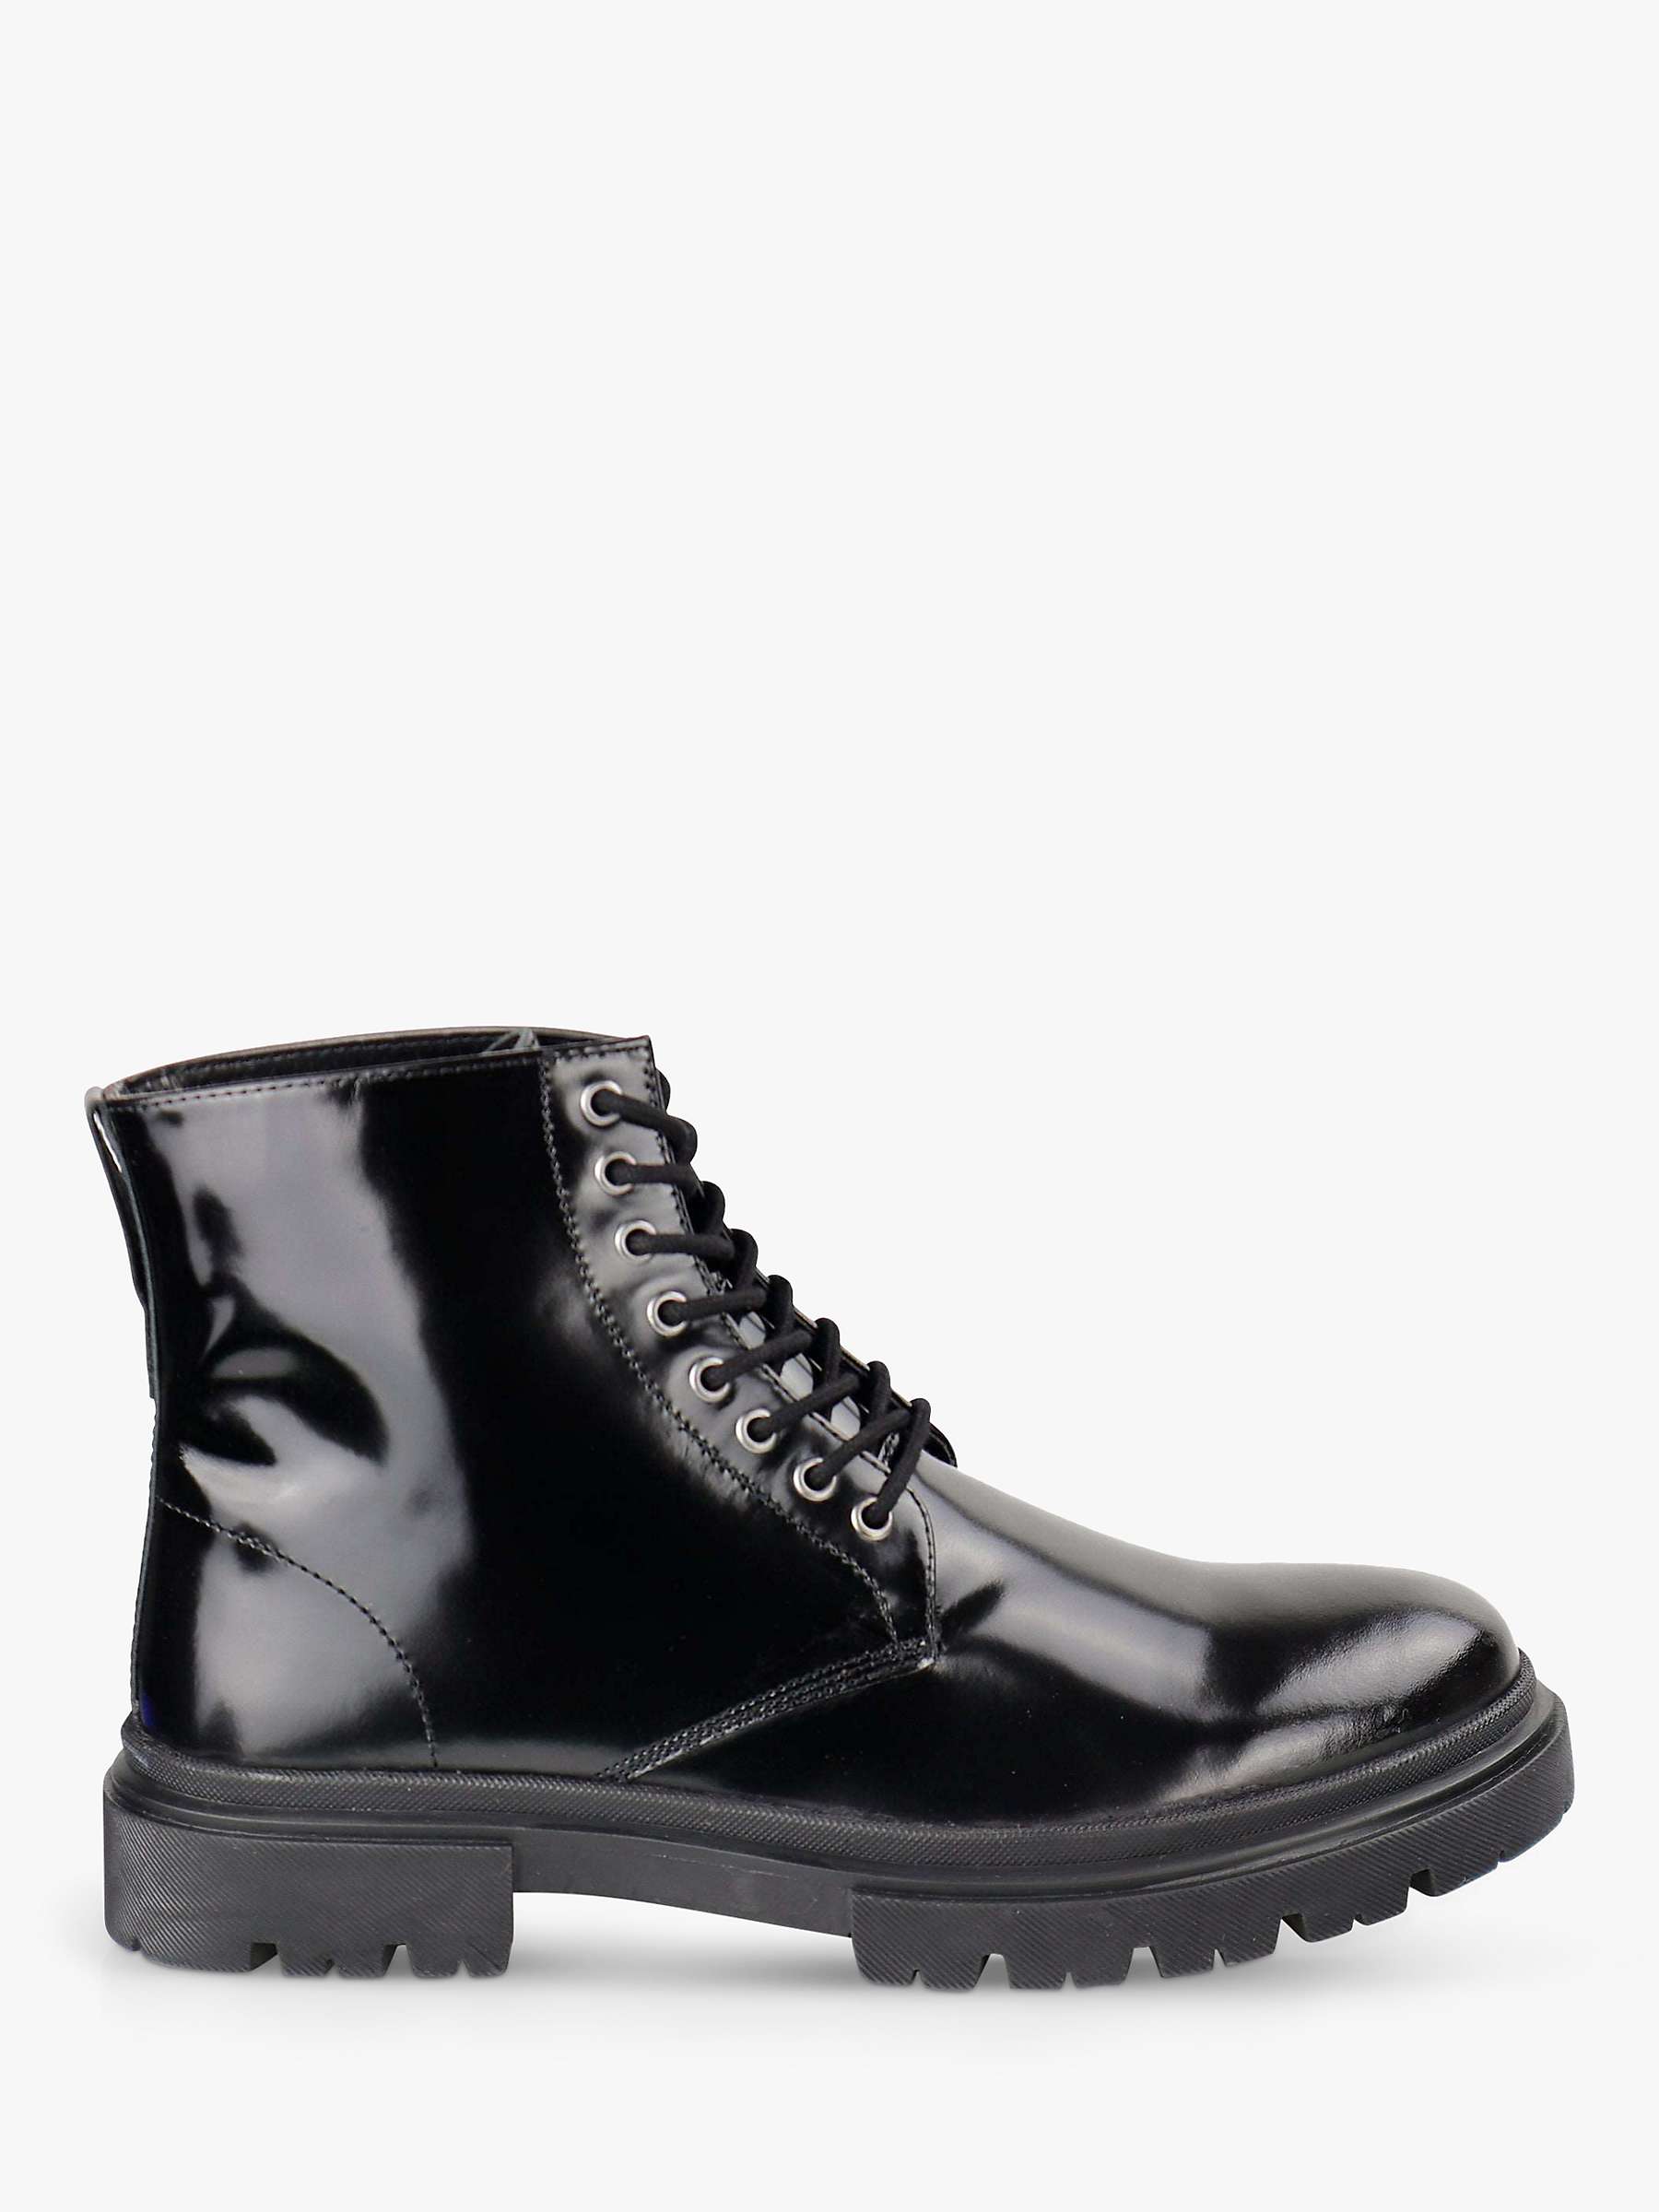 Buy Silver Street London Greenwich Patent Leather Lace Up Ankle Boots, Black Online at johnlewis.com